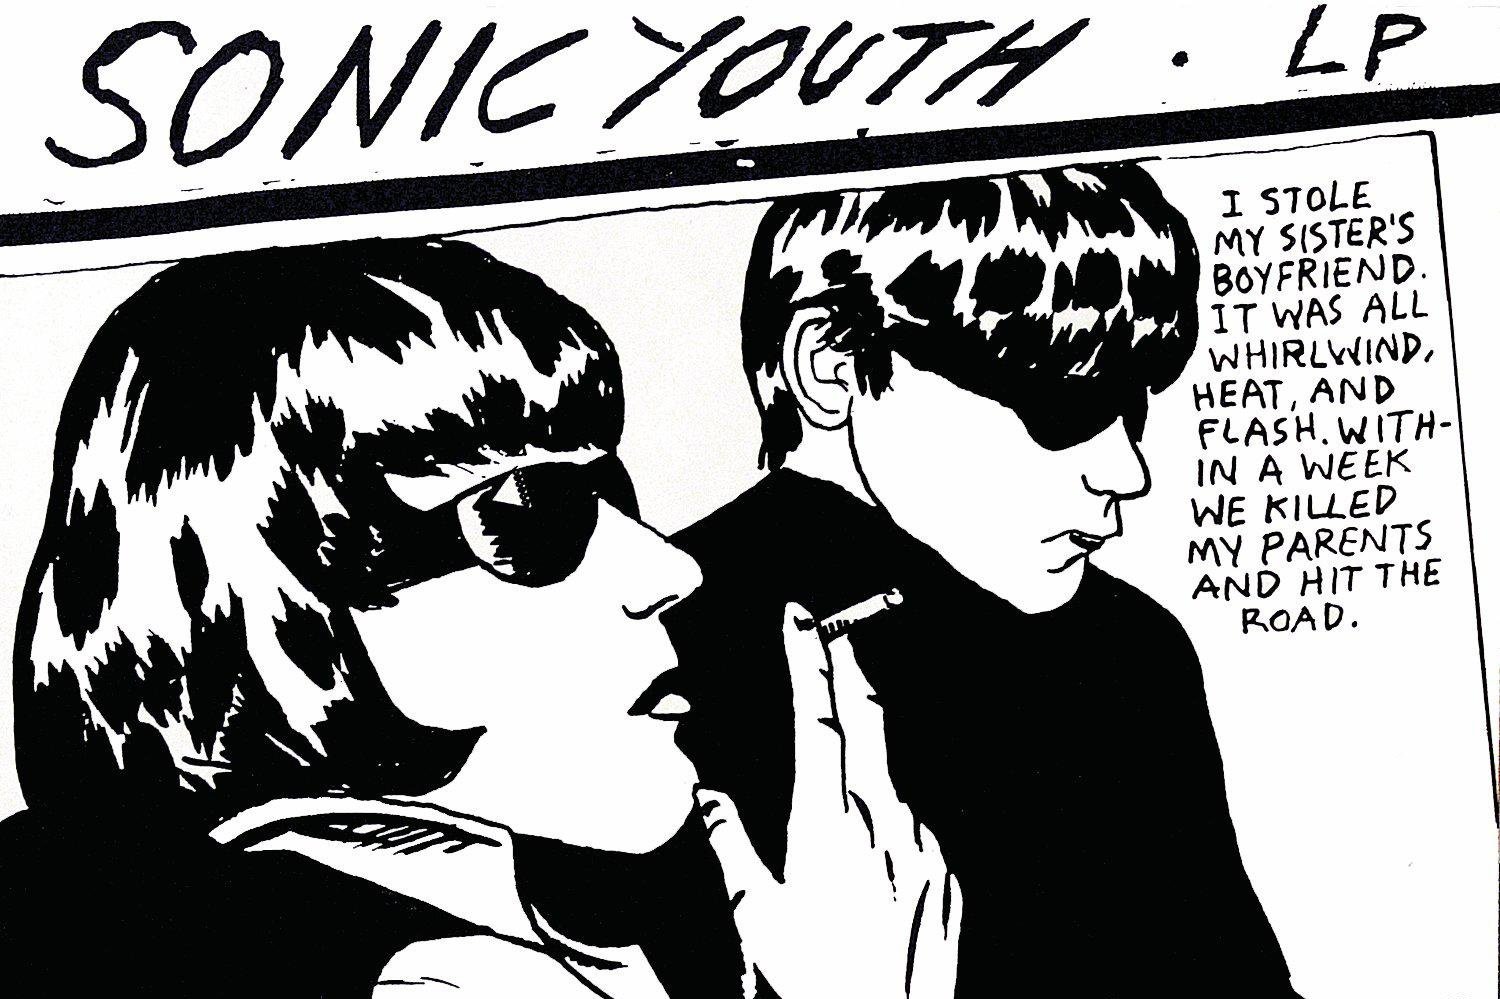 superstar sonic youth